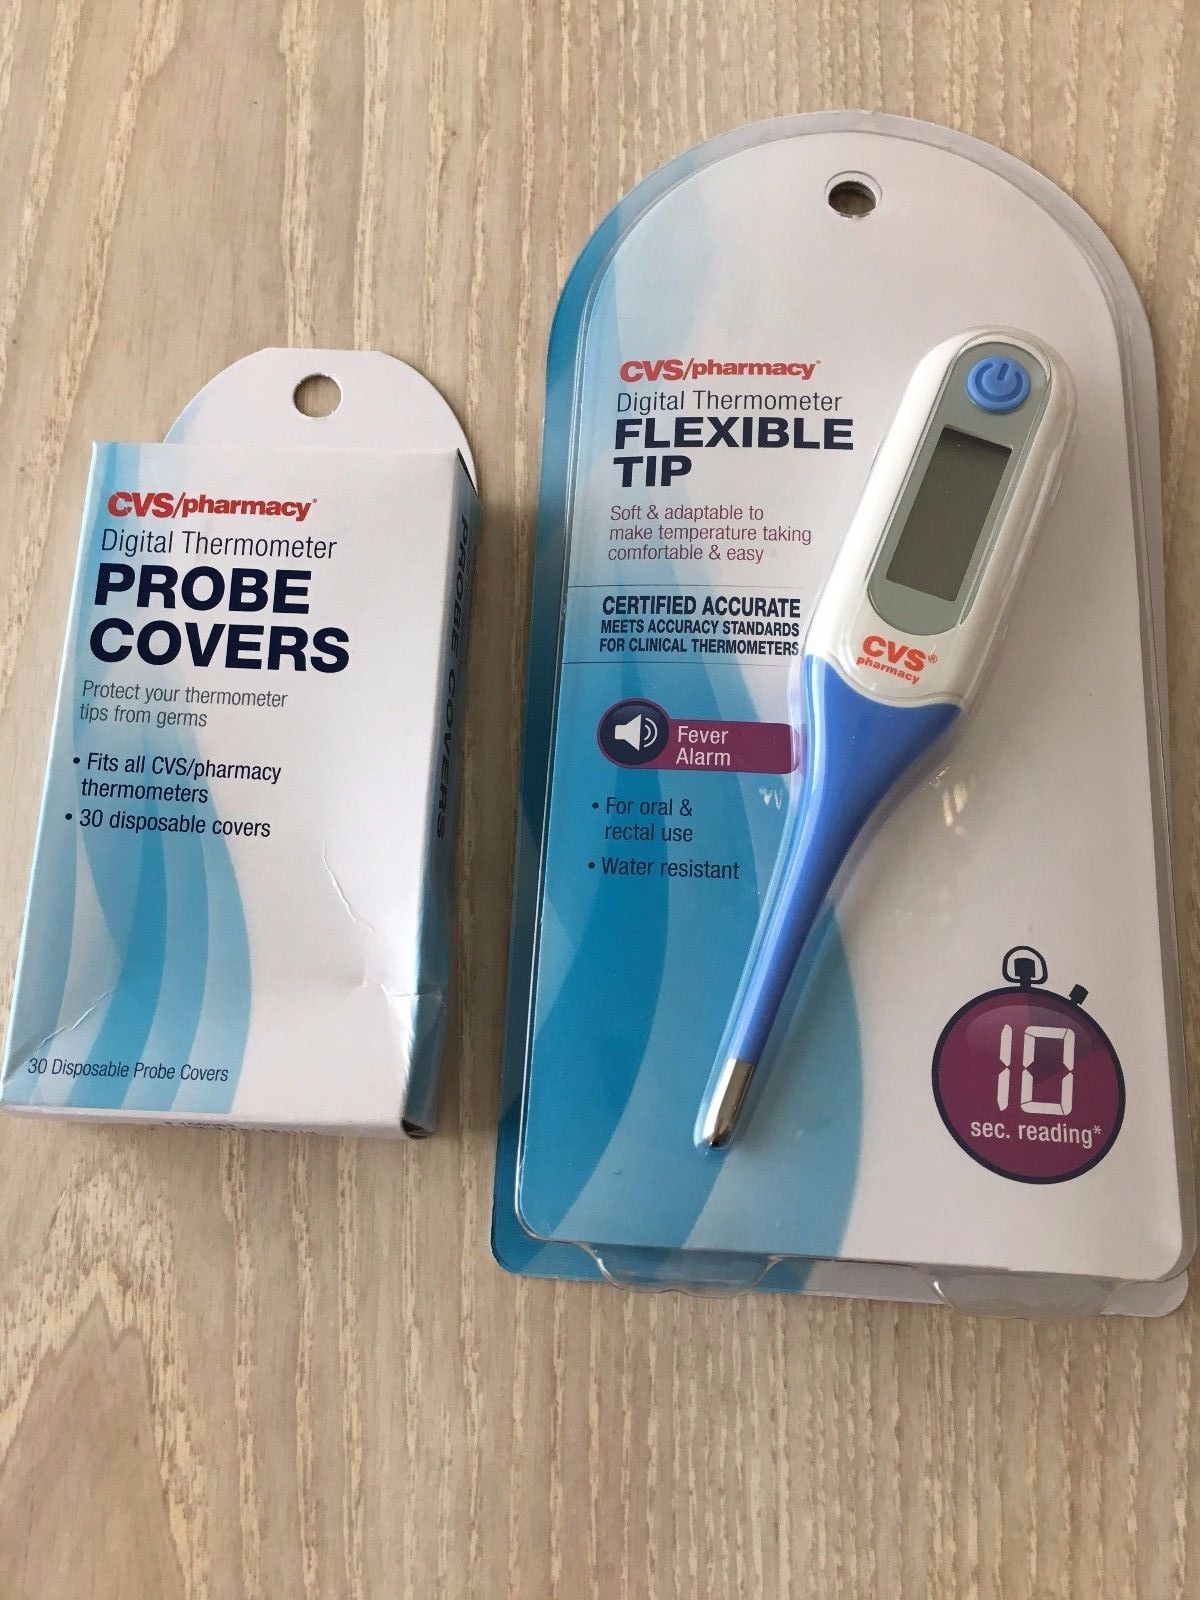 CVS DIGITAL THERMOMETER FLEXIBLE TIP&30 DISPOSABLE PROBE COVERS